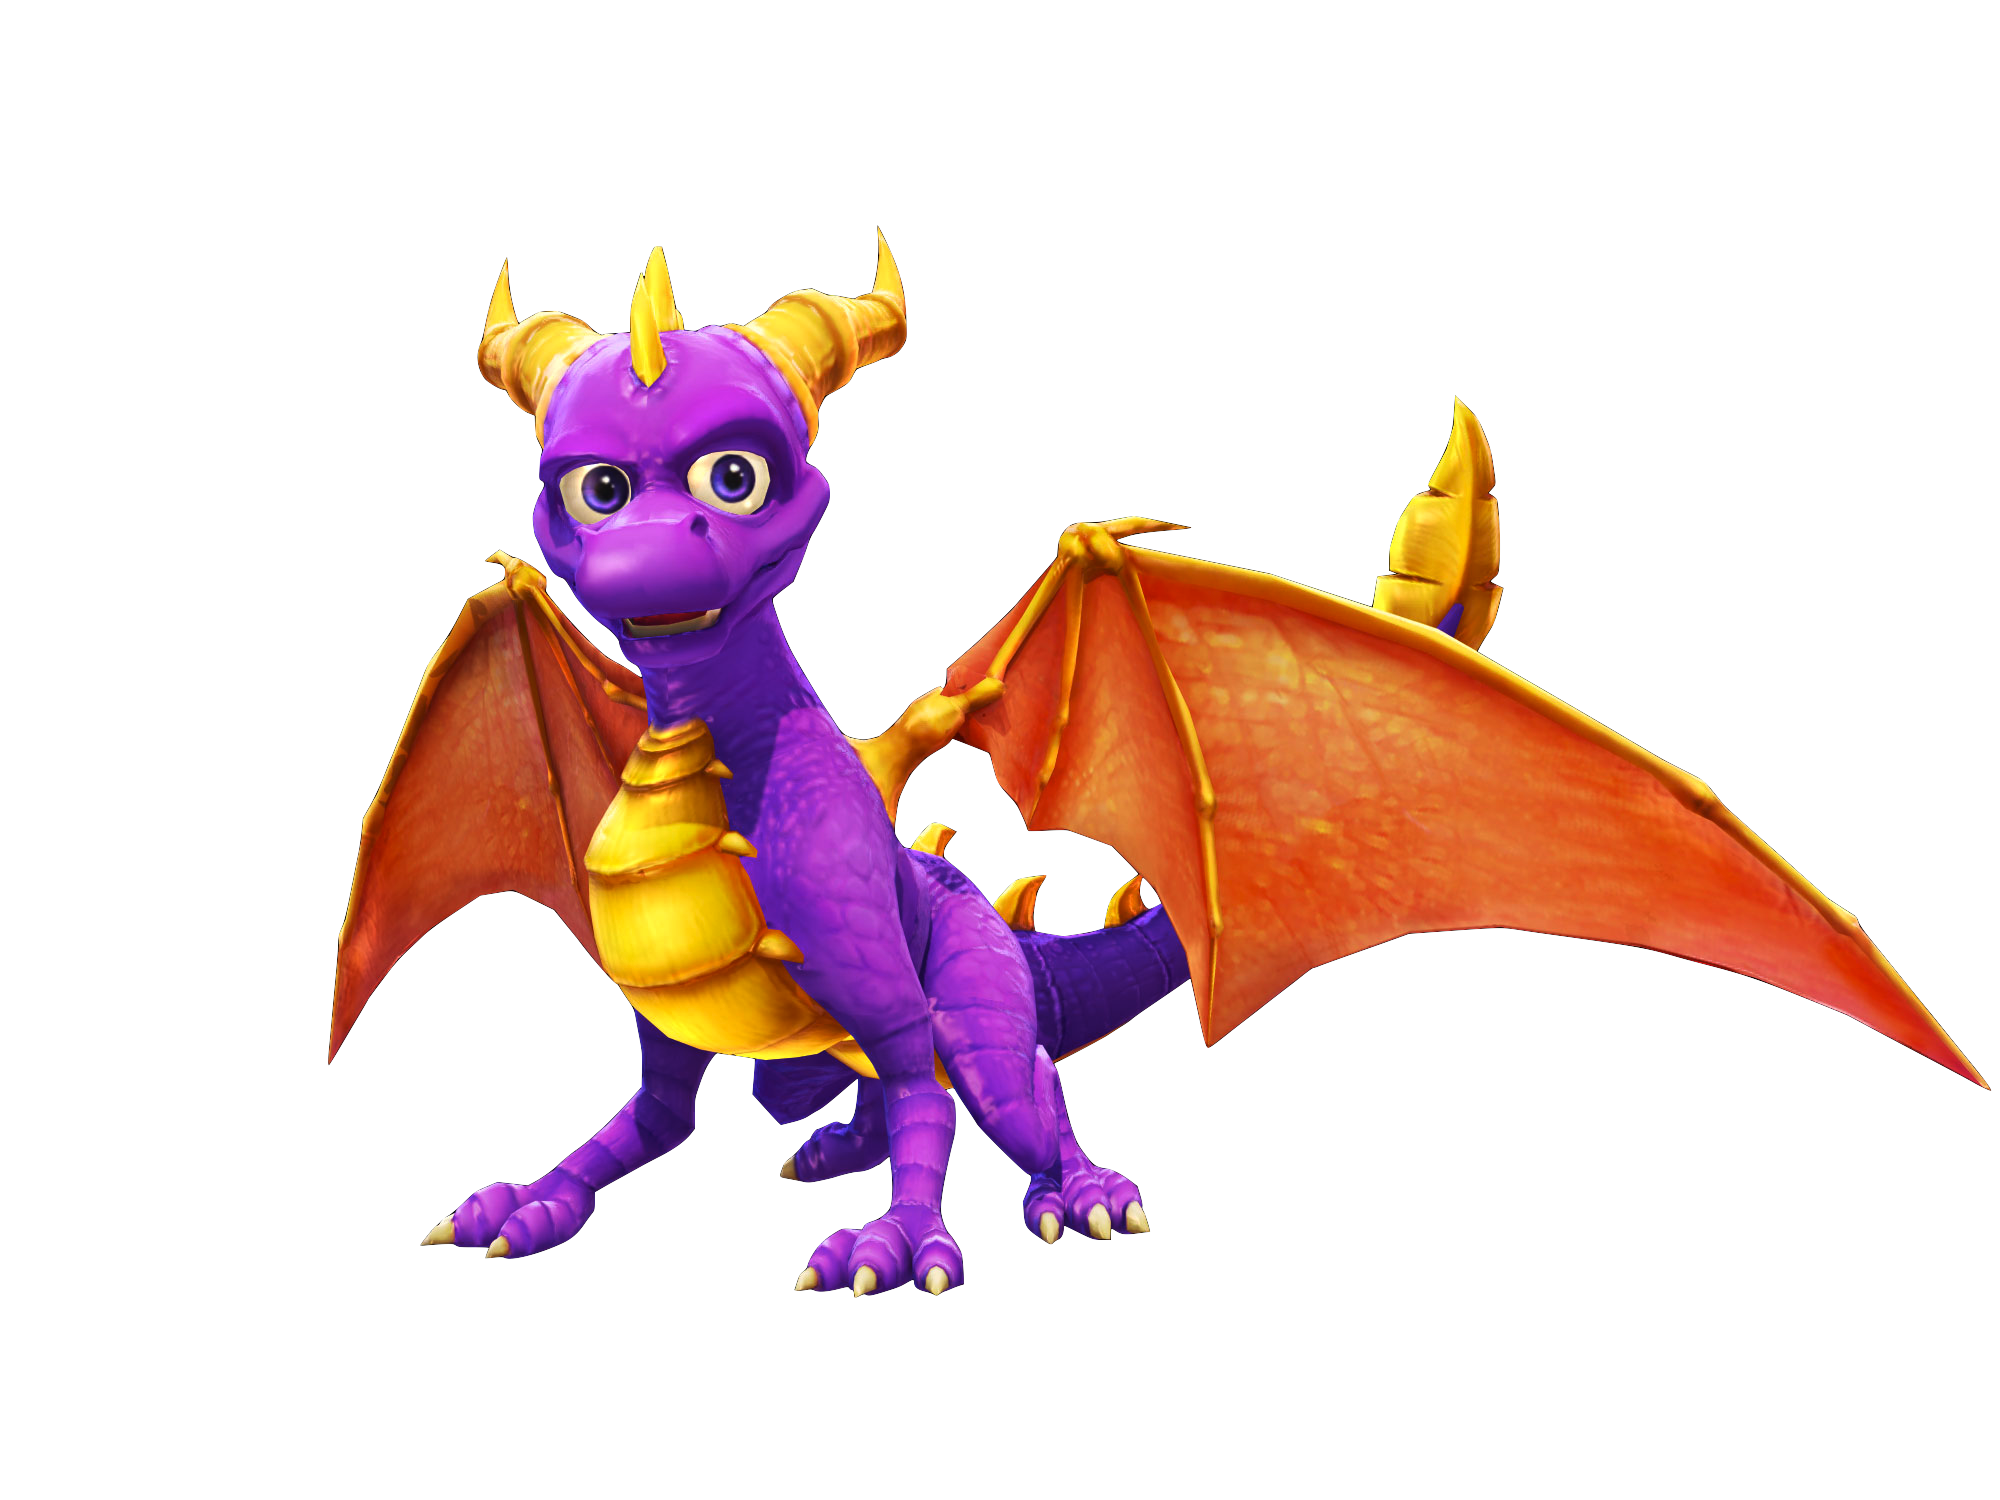 the legend of spyro dawn of the dragon ps3